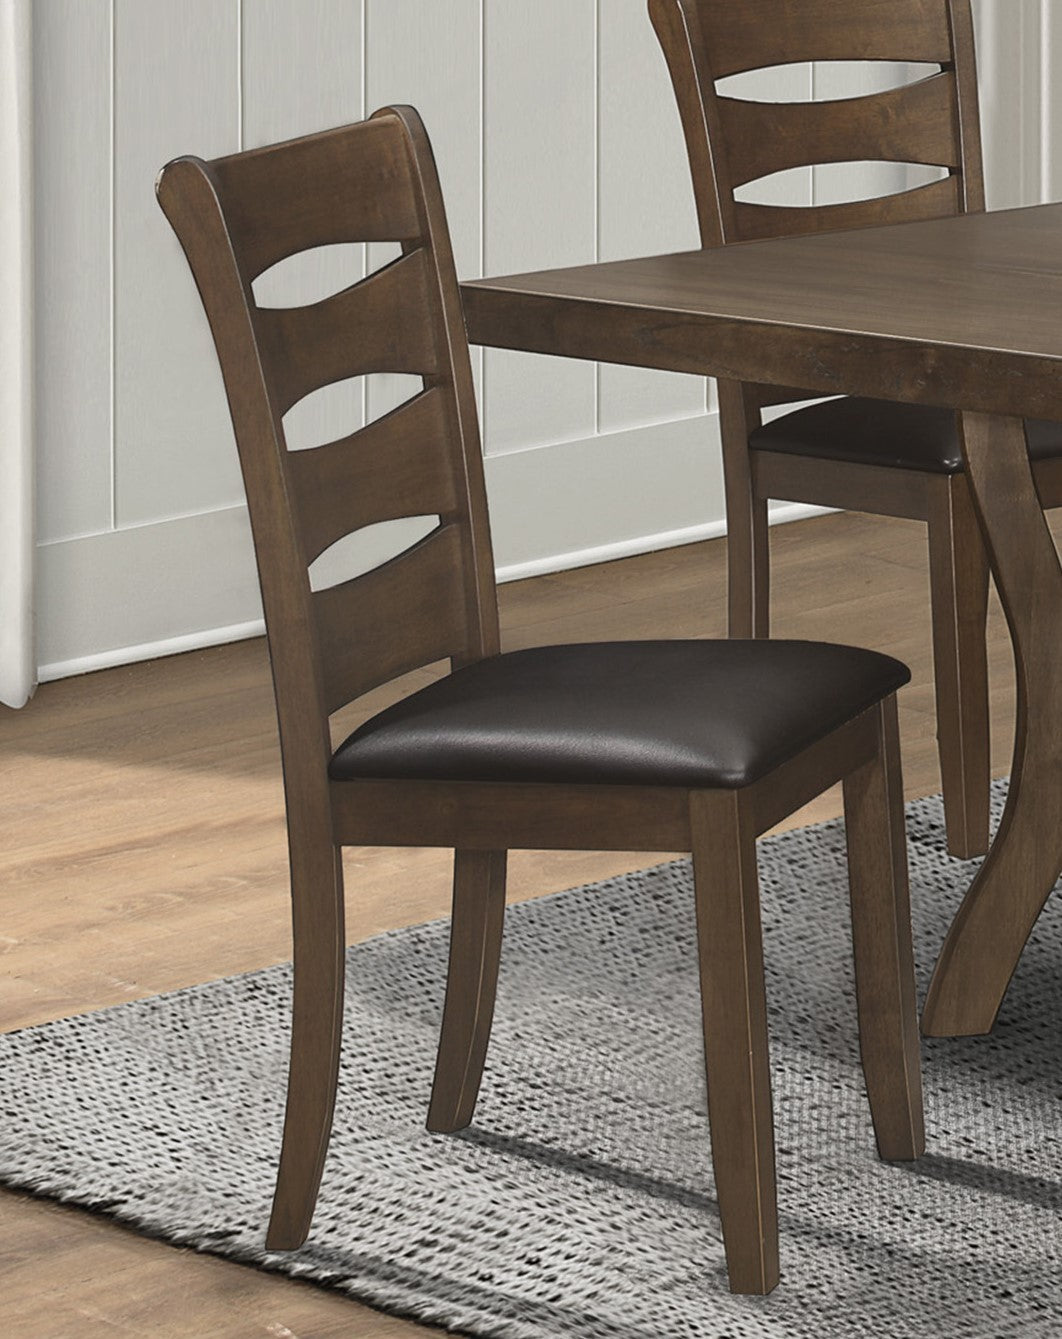 Transitional Style Unique Back Design Set of 2pc Wooden Side Chairs Brown Finish Dining Room Furniture